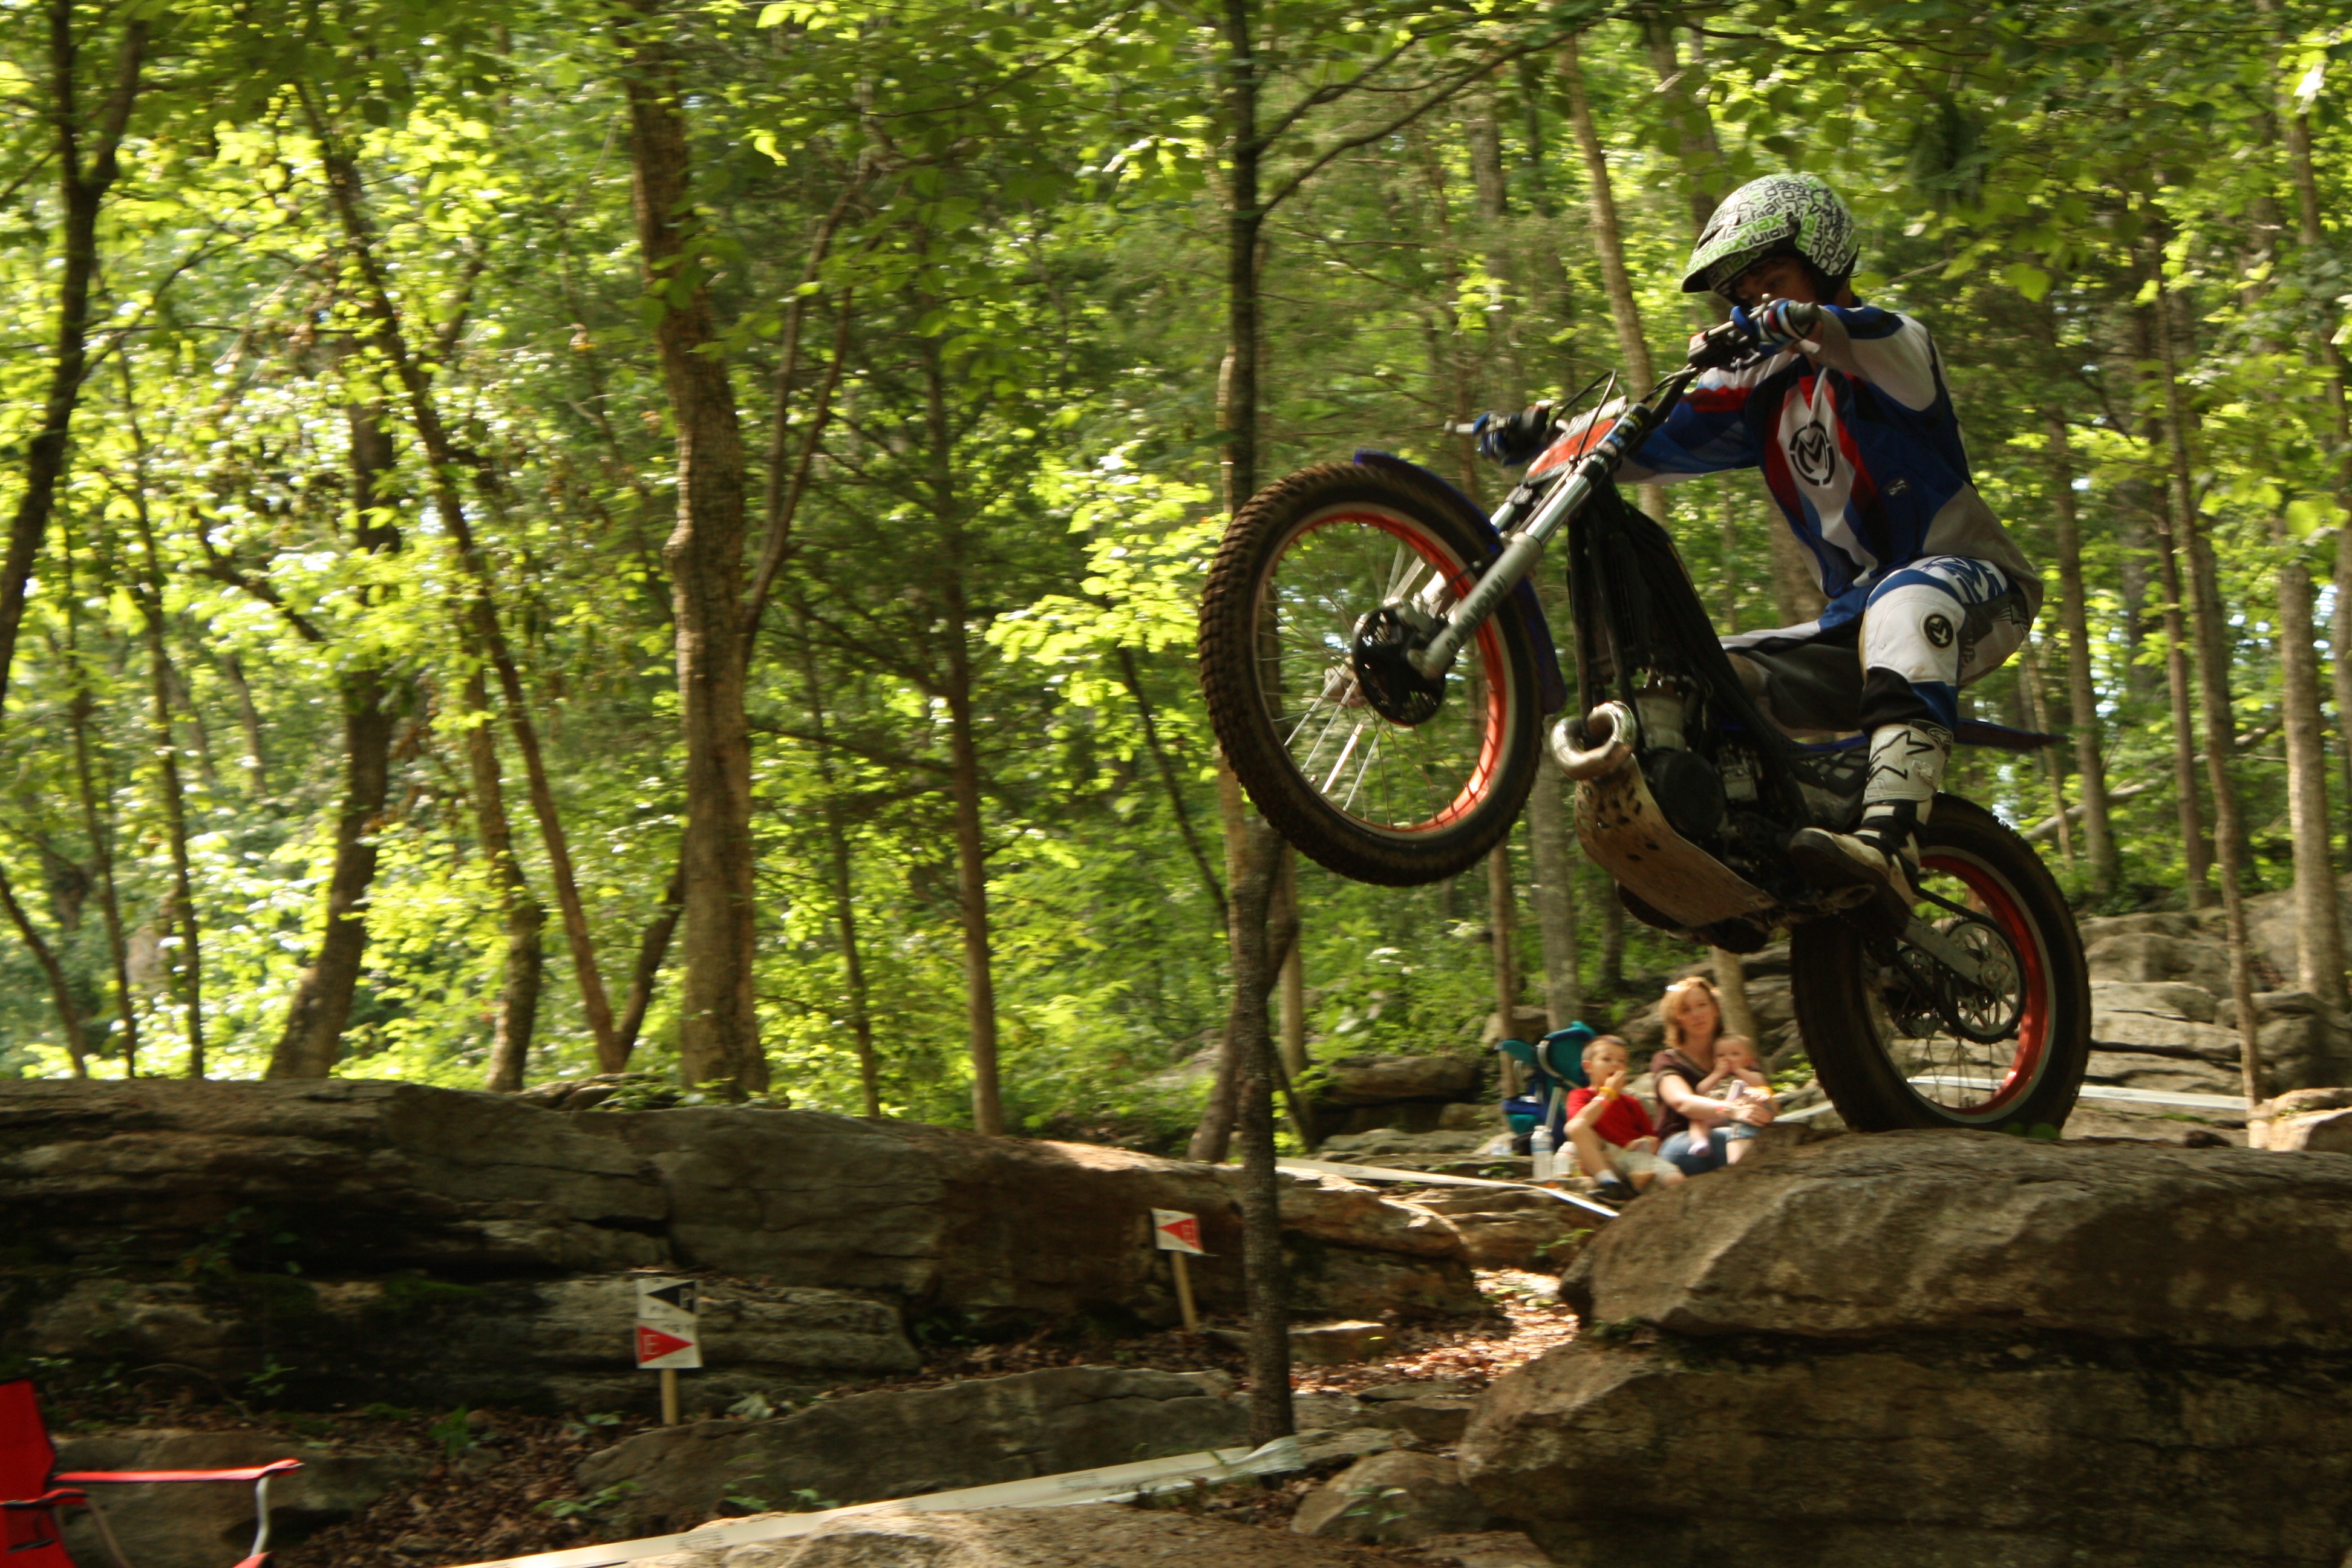 Phil made his return to National MotoTrials and did some wheelies